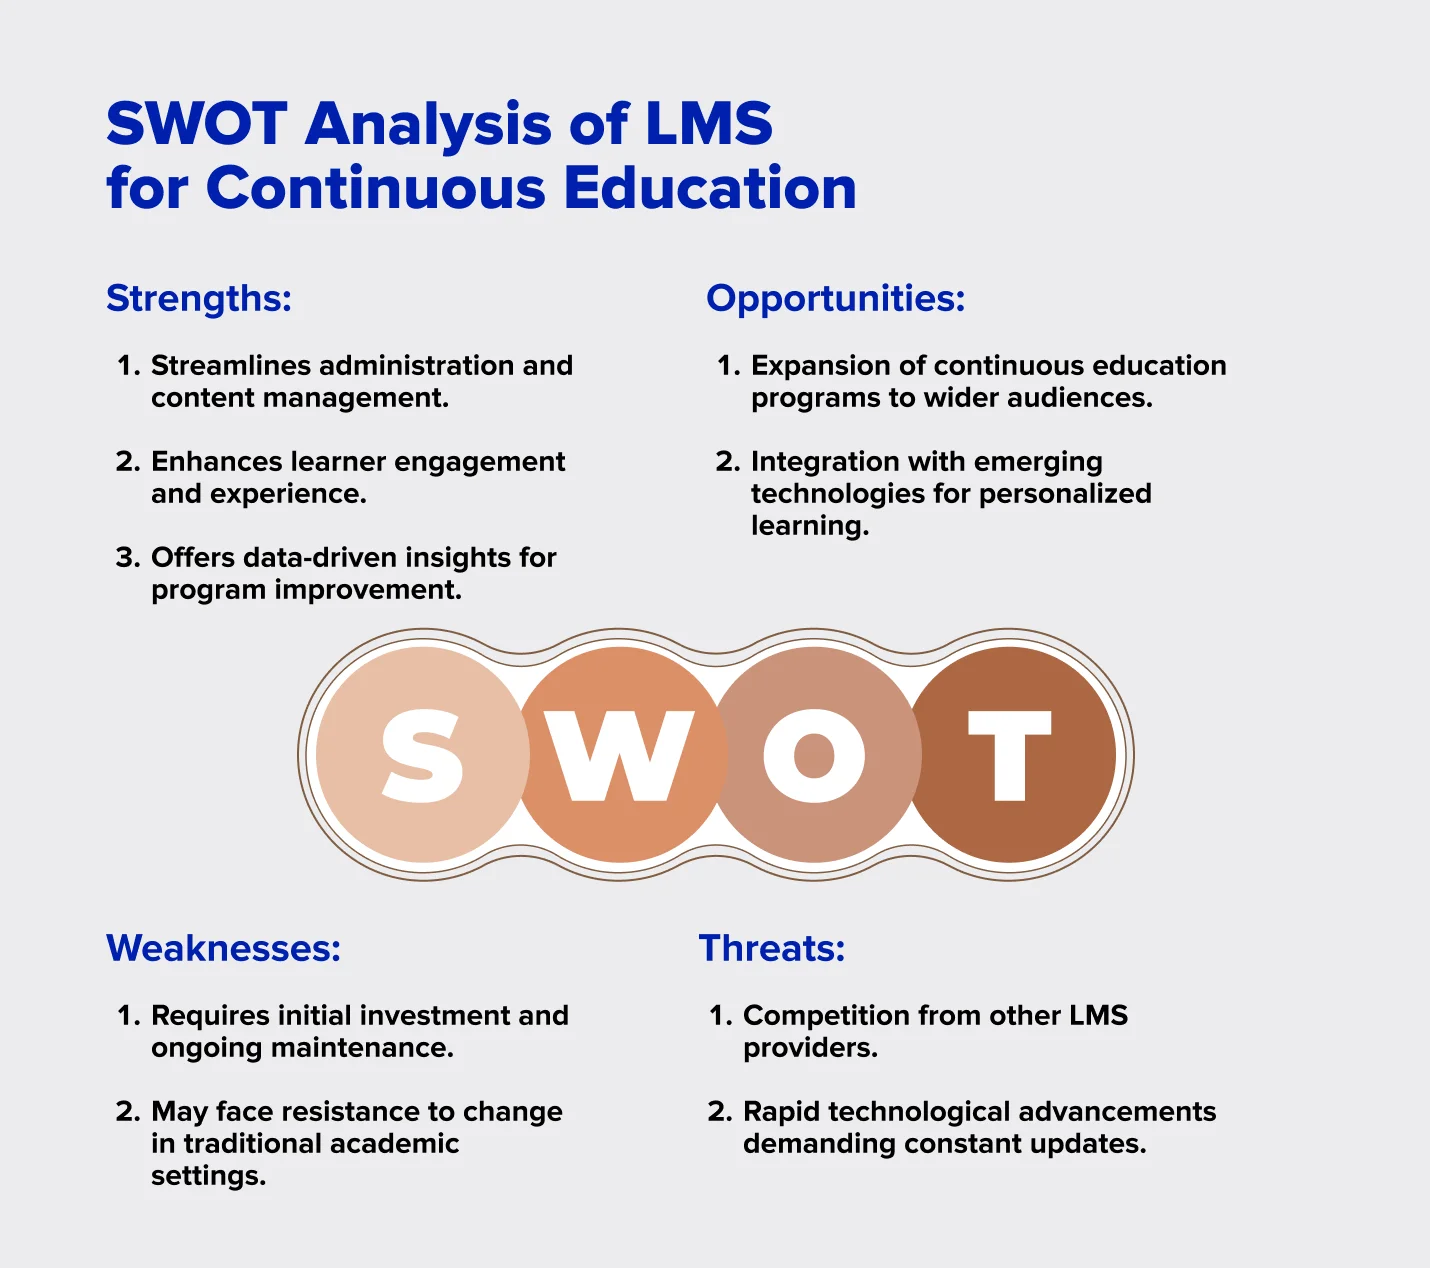 SWOT Analysis of LMS for Continuous Education